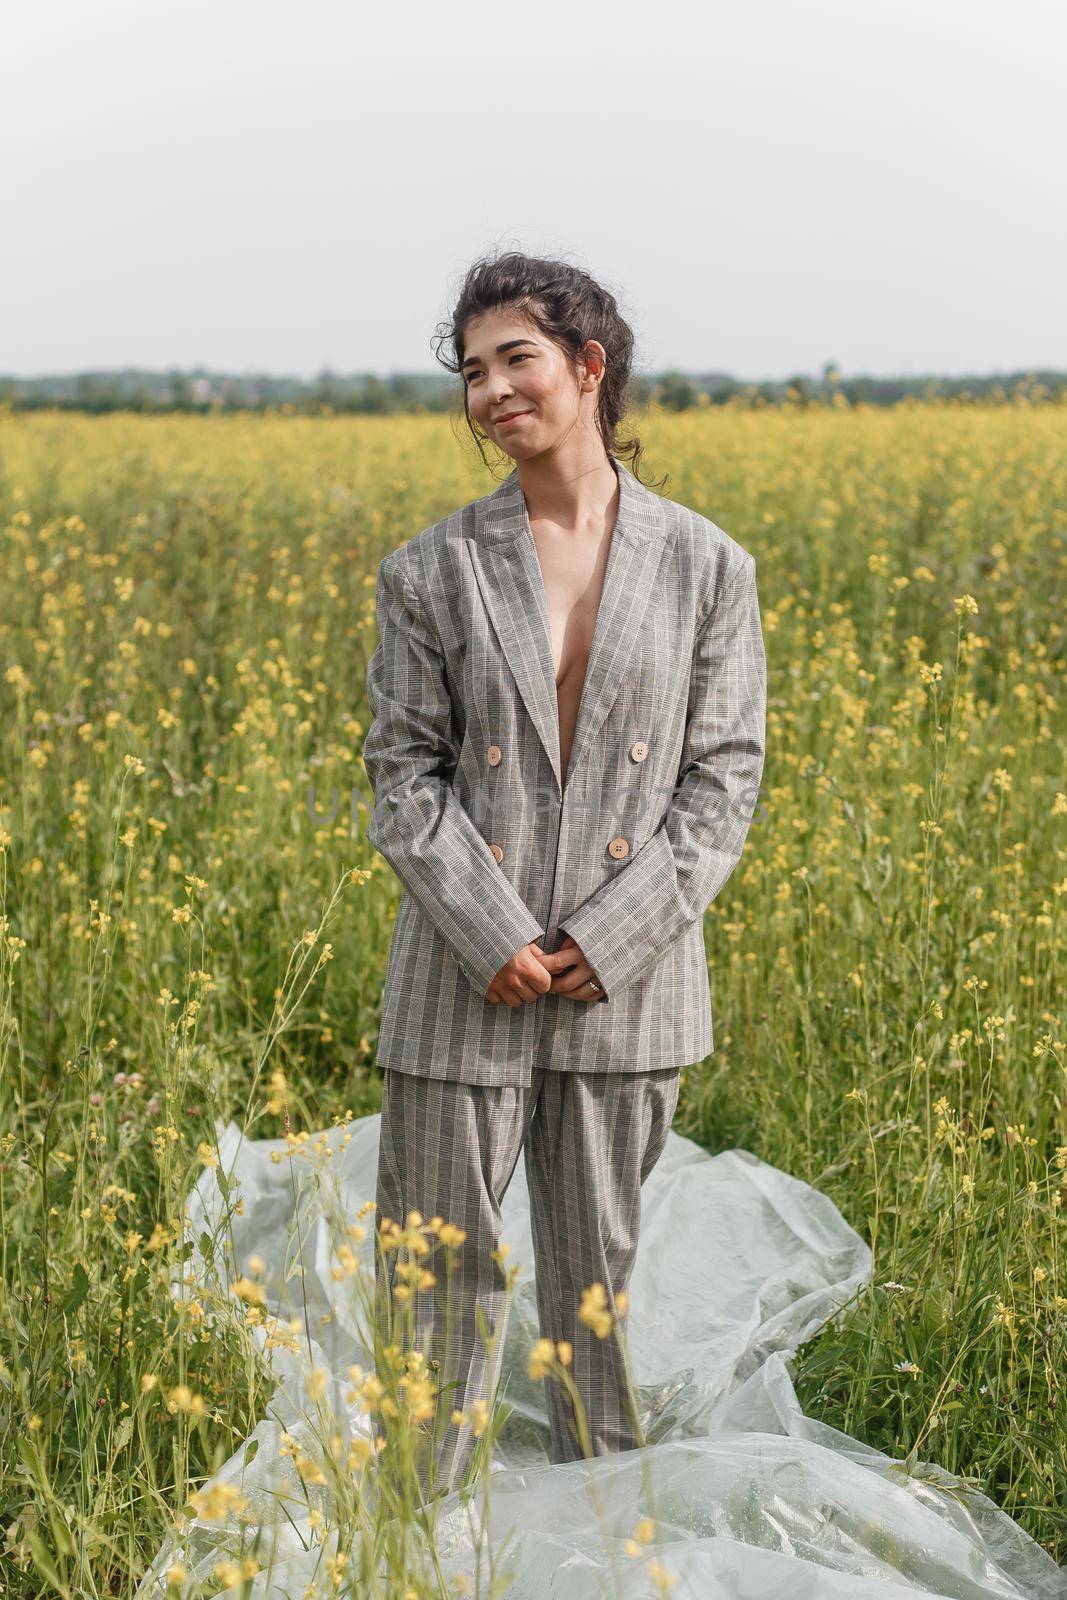 An Asian model poses in a field of yellow flowers for a clothing brand, polyethylene is the main props for a photo shoot. by Annu1tochka